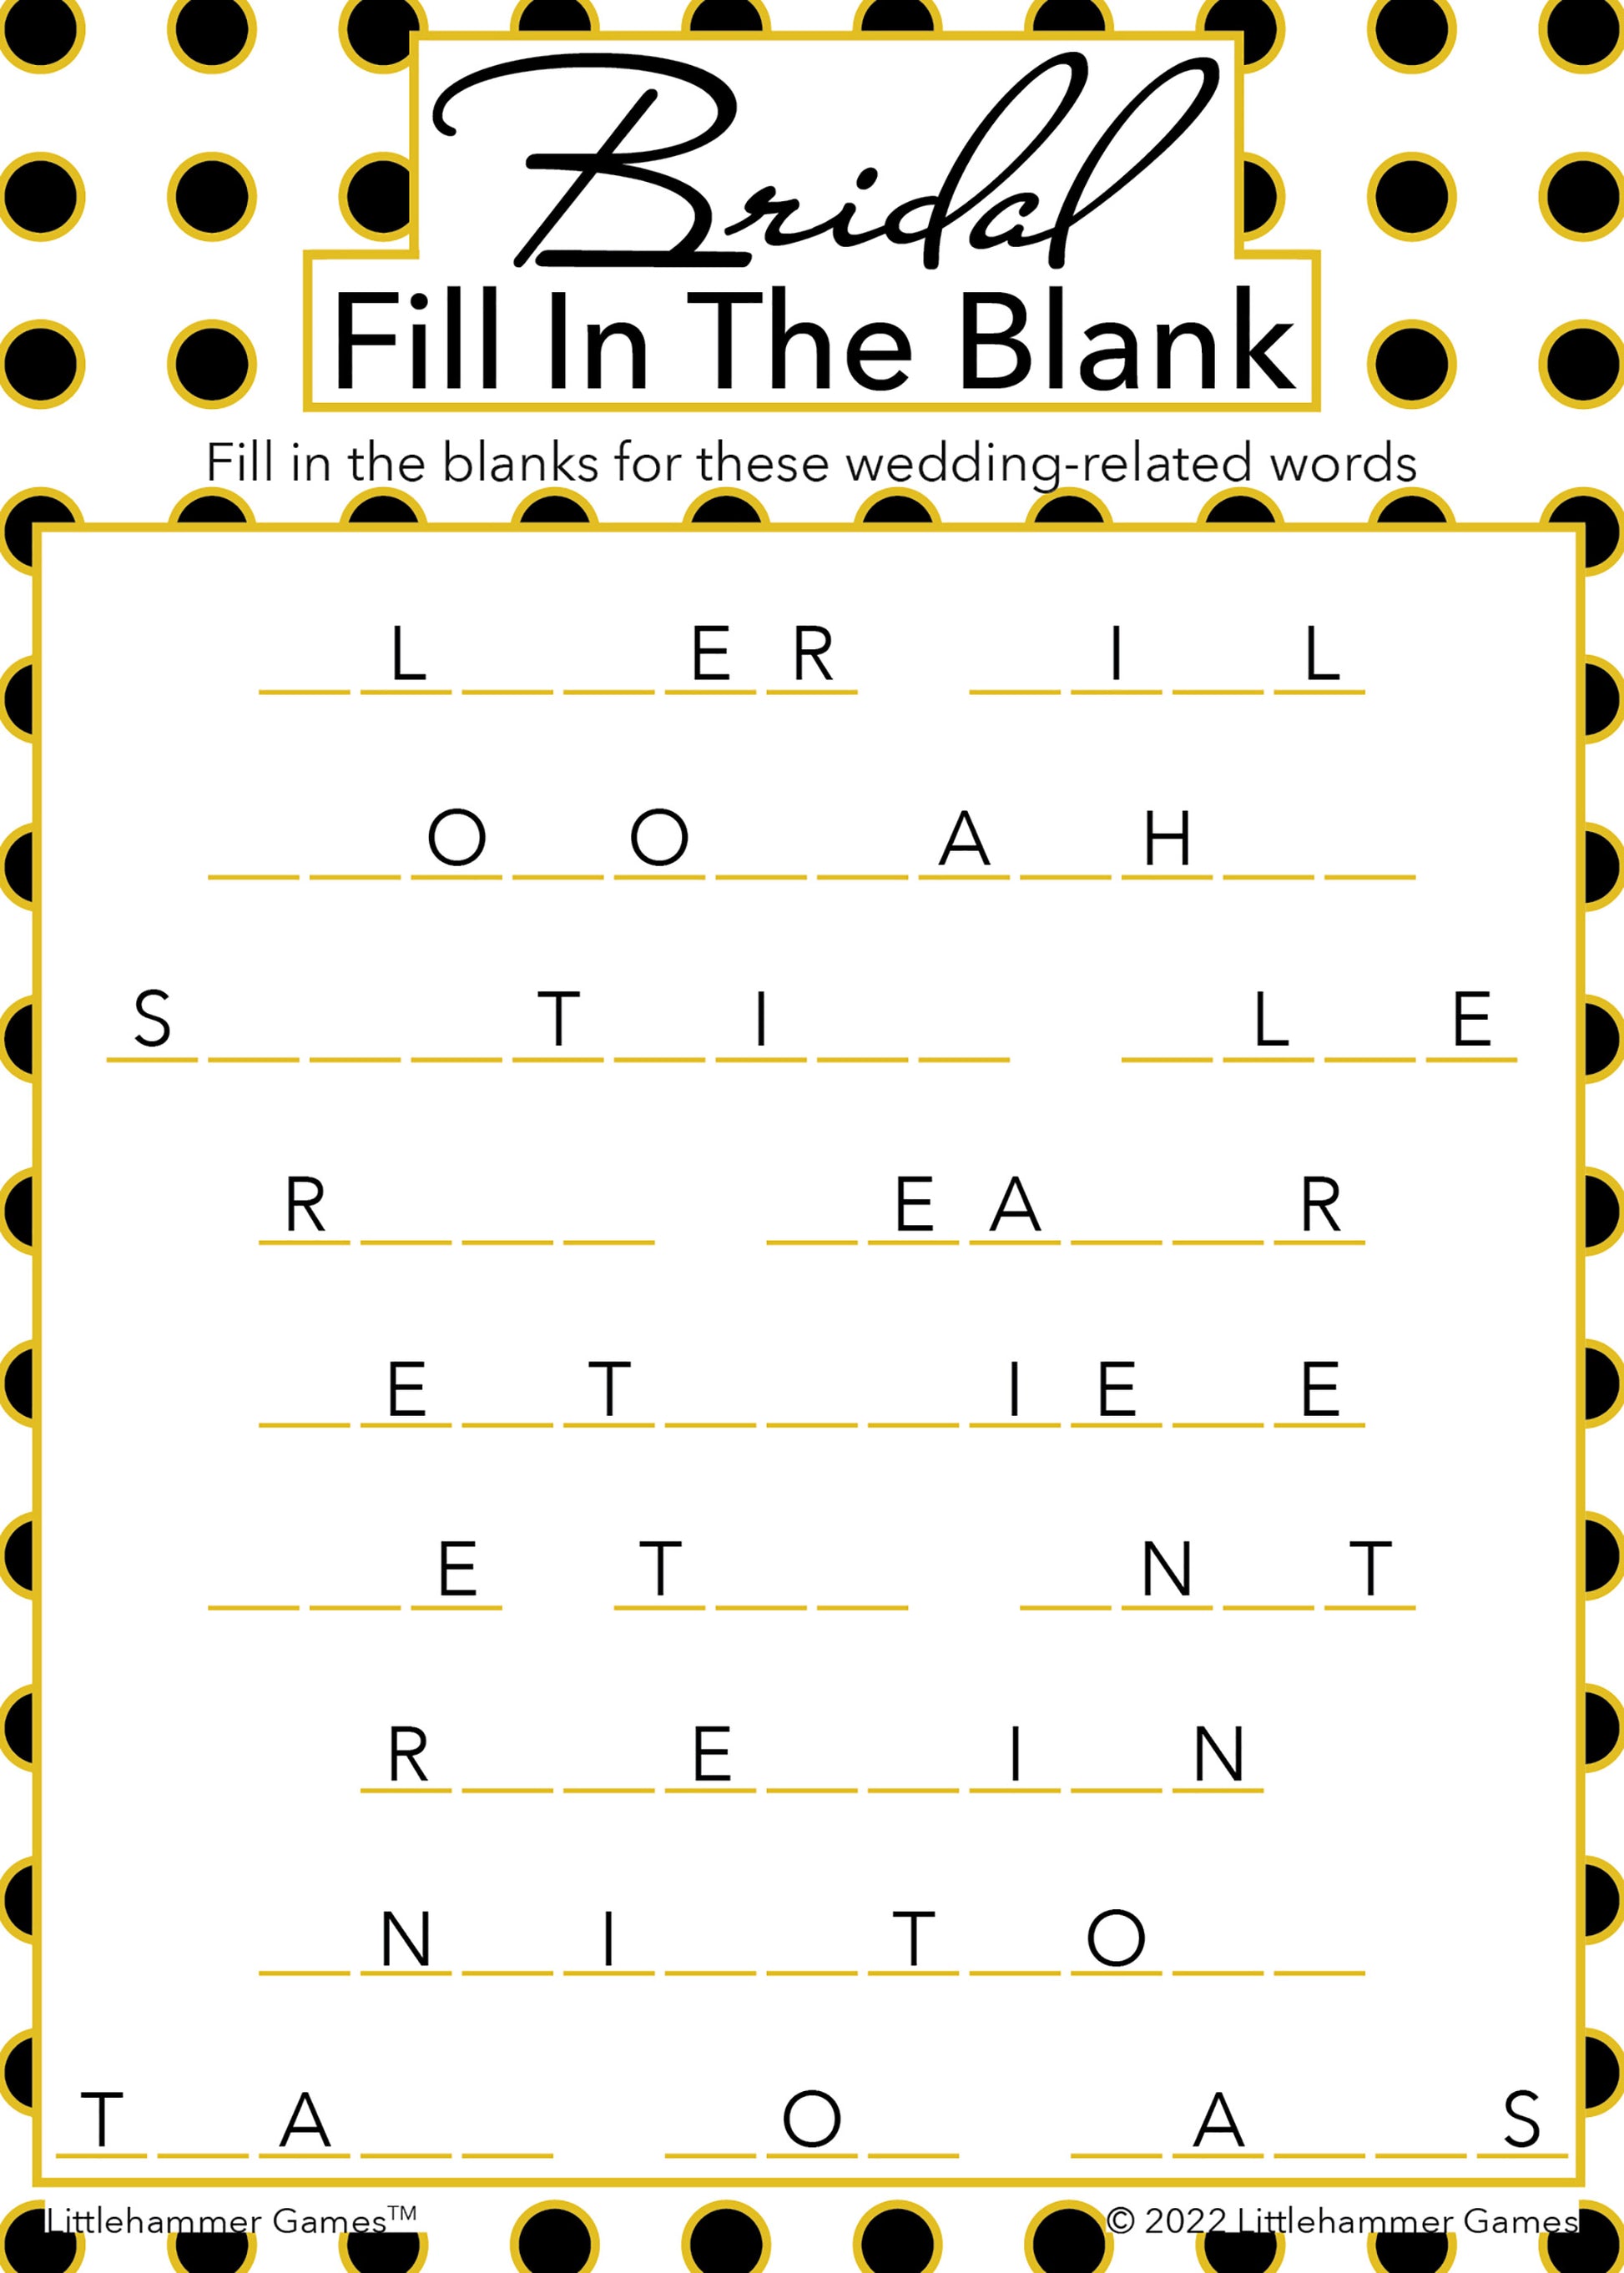 Bridal Fill in the Blank game card with a black and gold polka dot background